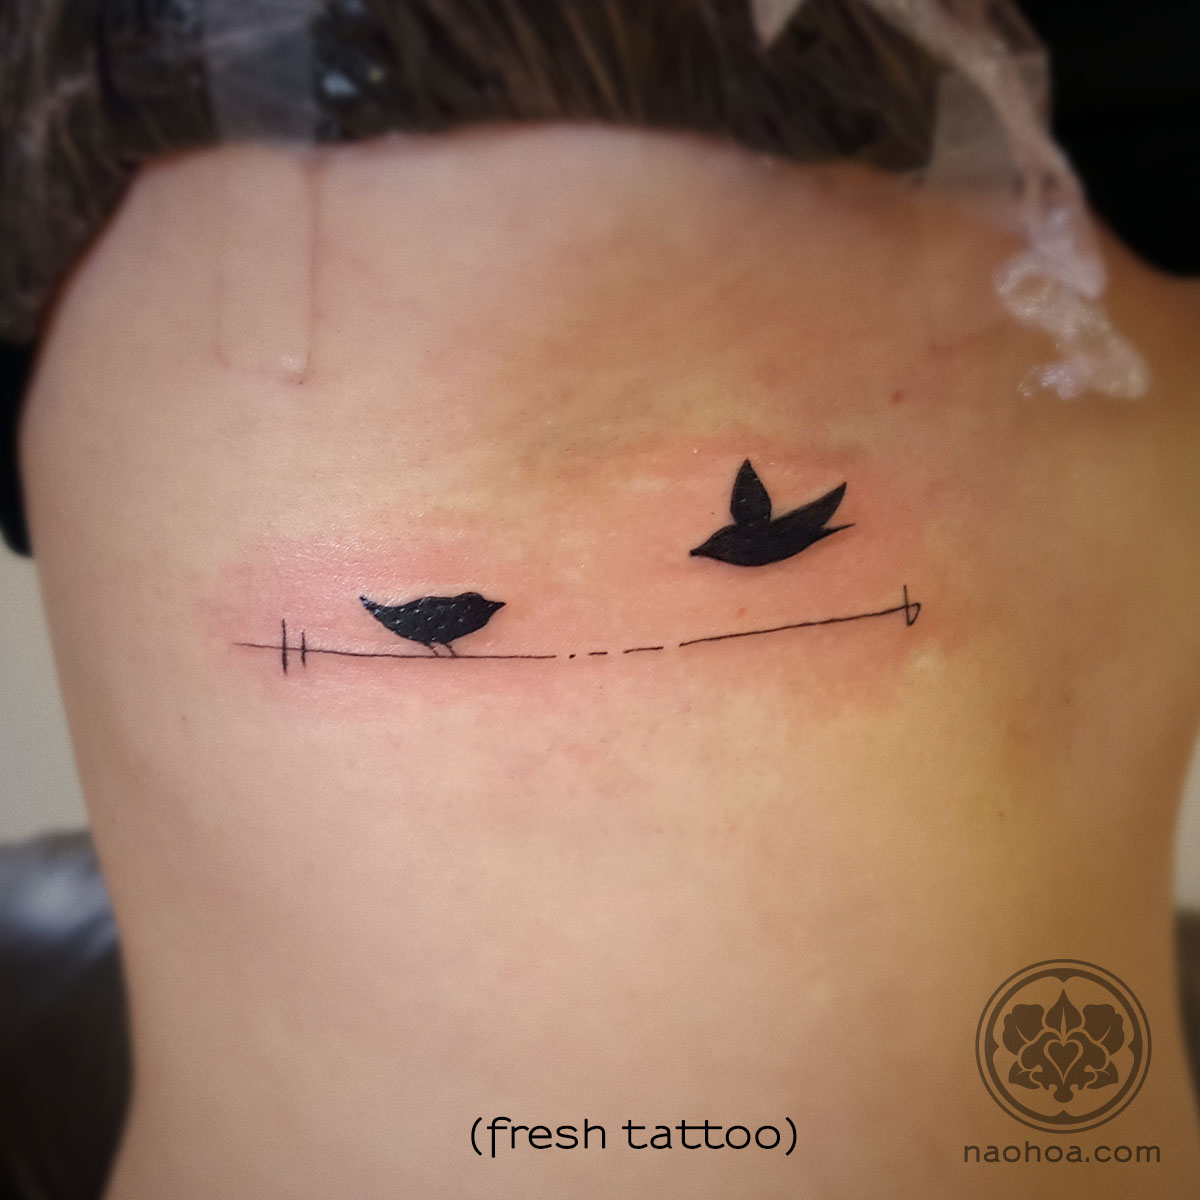 Two birds symbolising the client's children, along with their initials. Designed and tattooed by Naomi Hoang at NAOHOA Luxury Bespoke Tattoos, Cardiff (Wales, UK).